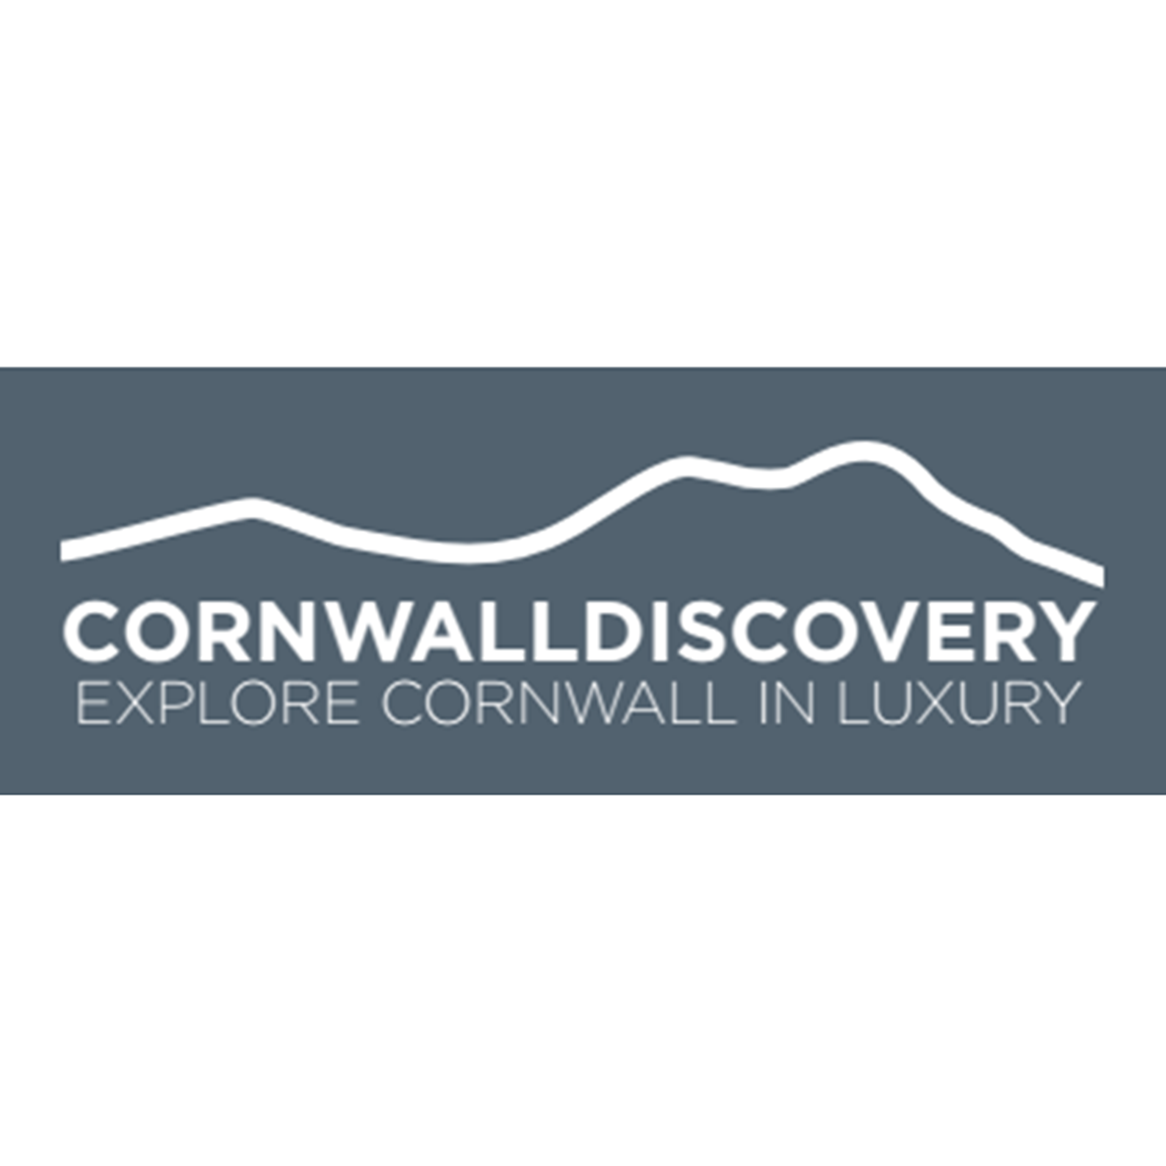 Offering luxury guided tours of Cornwall, Land Rover, Bodmin Moor, Port Isaac, Poldark, coast, country